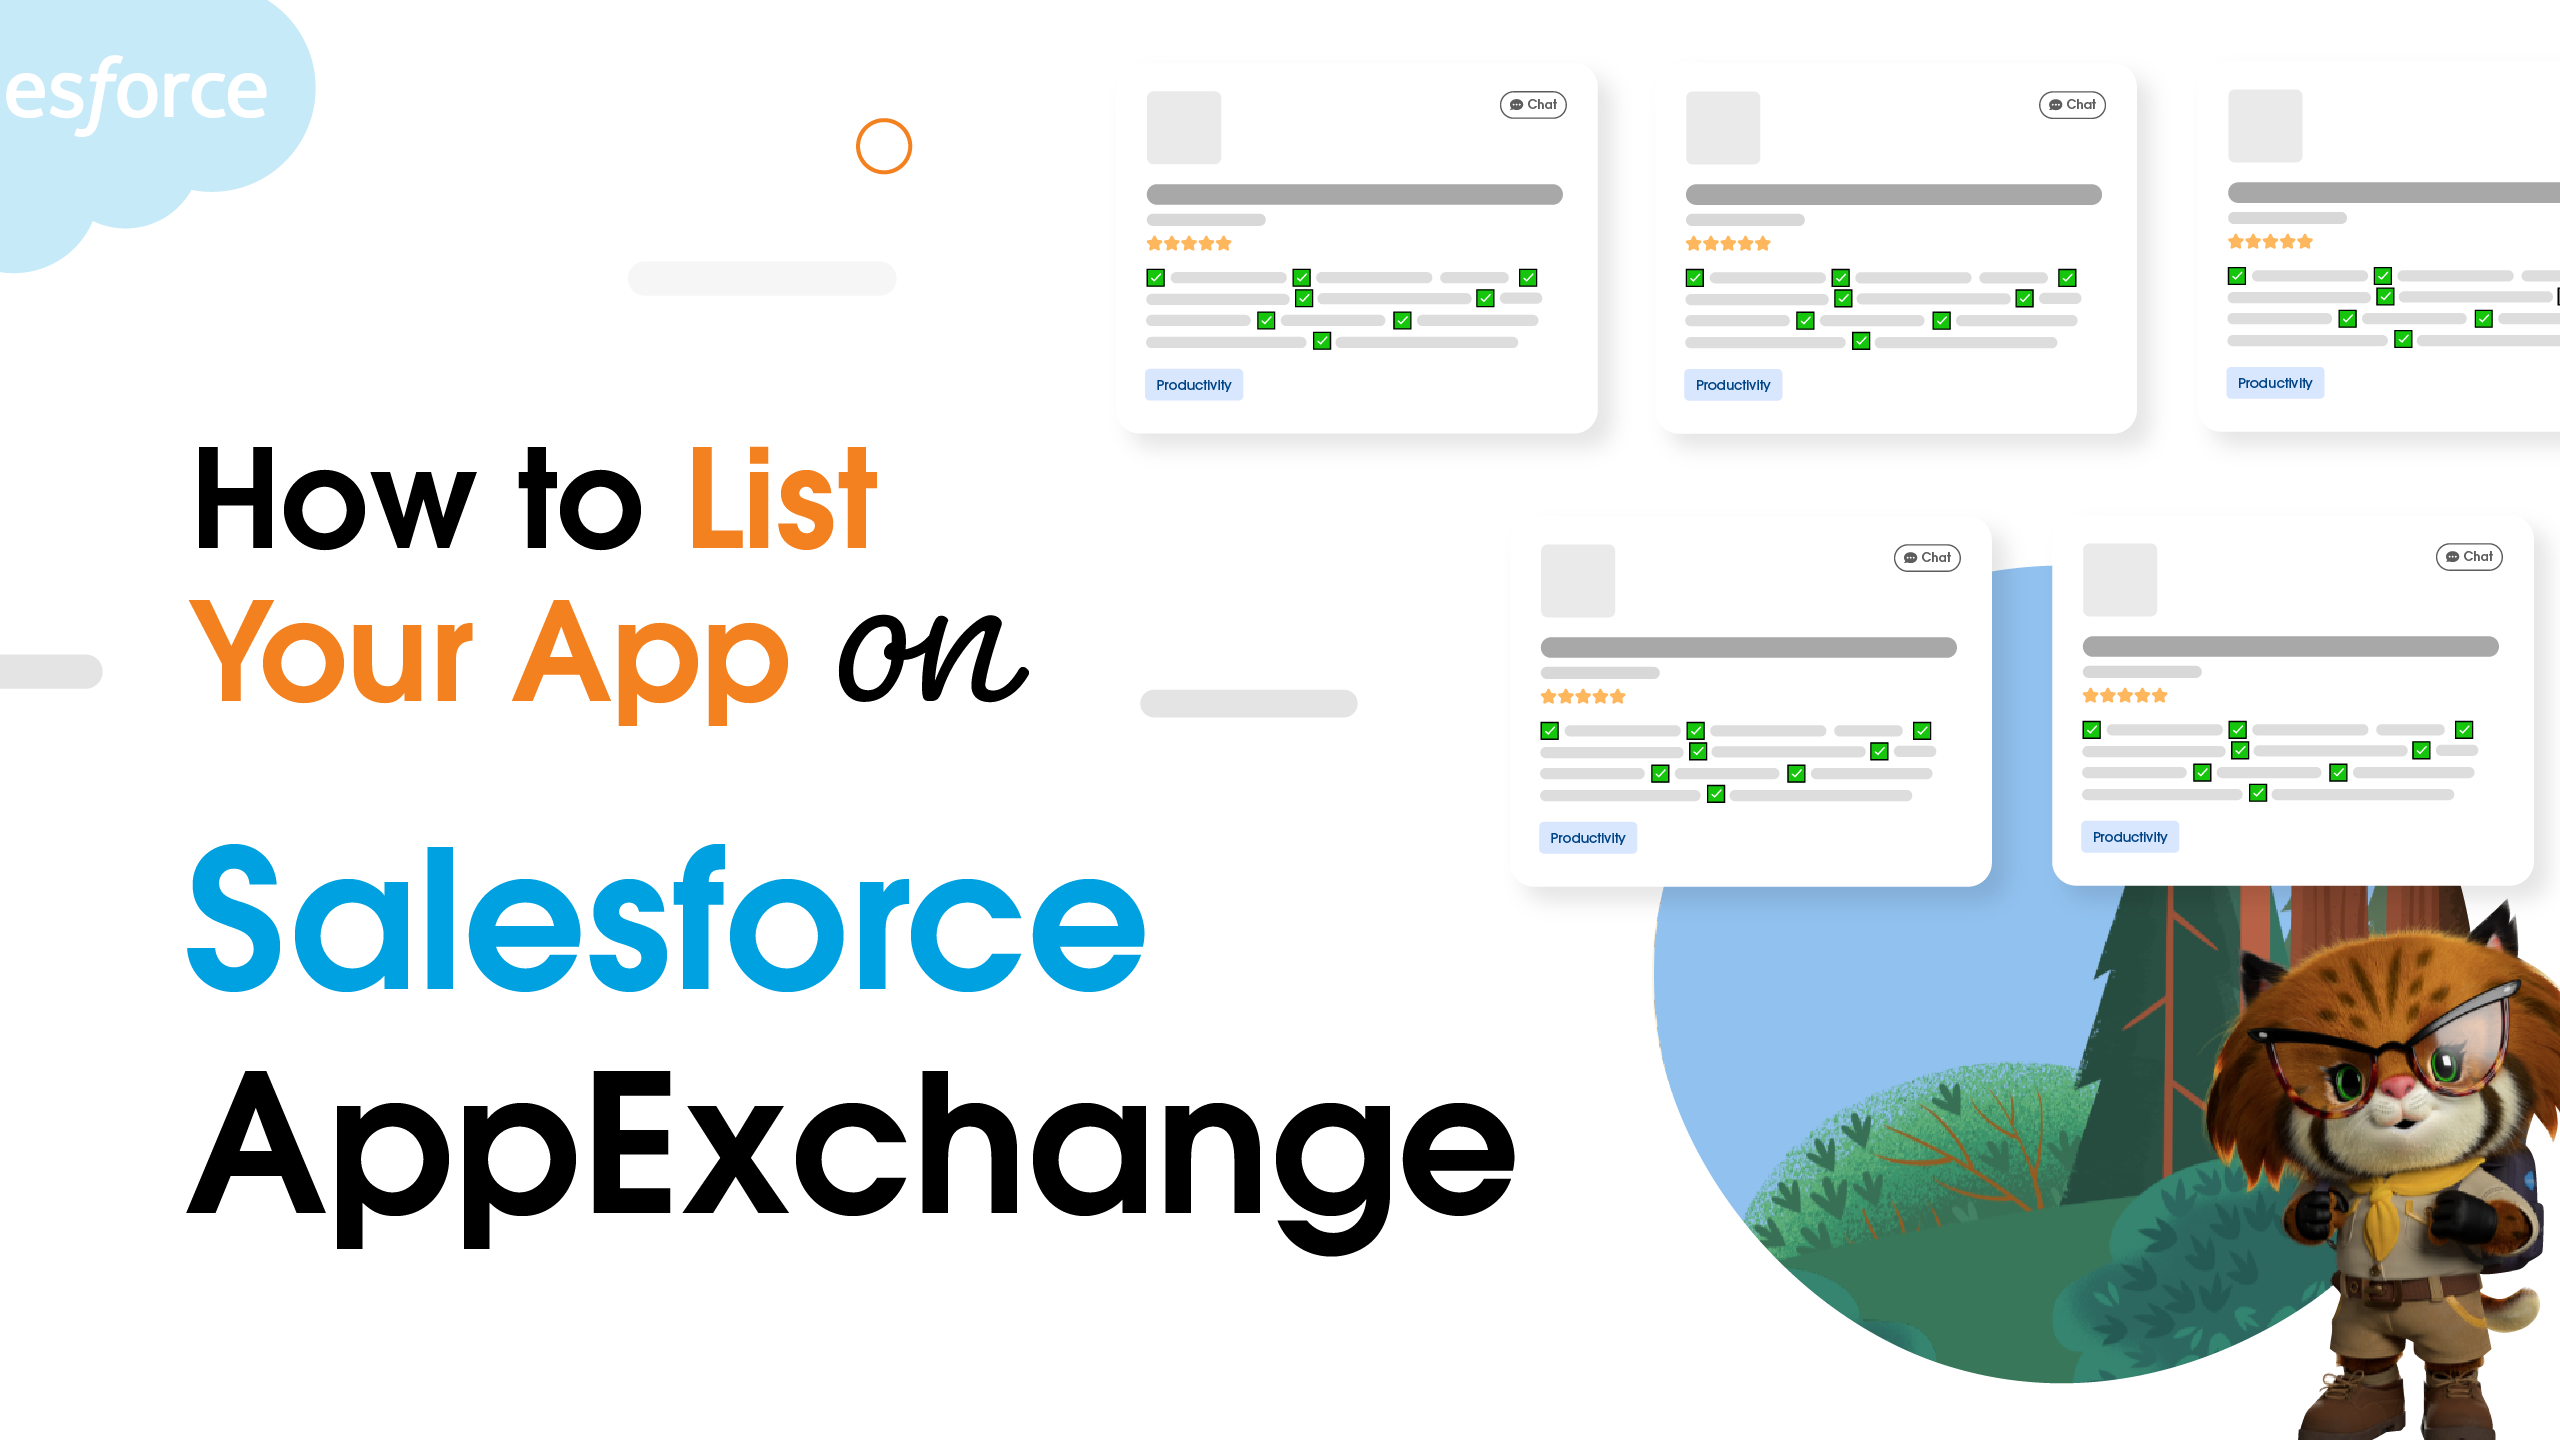 How to List Your App on Salesforce AppExchange